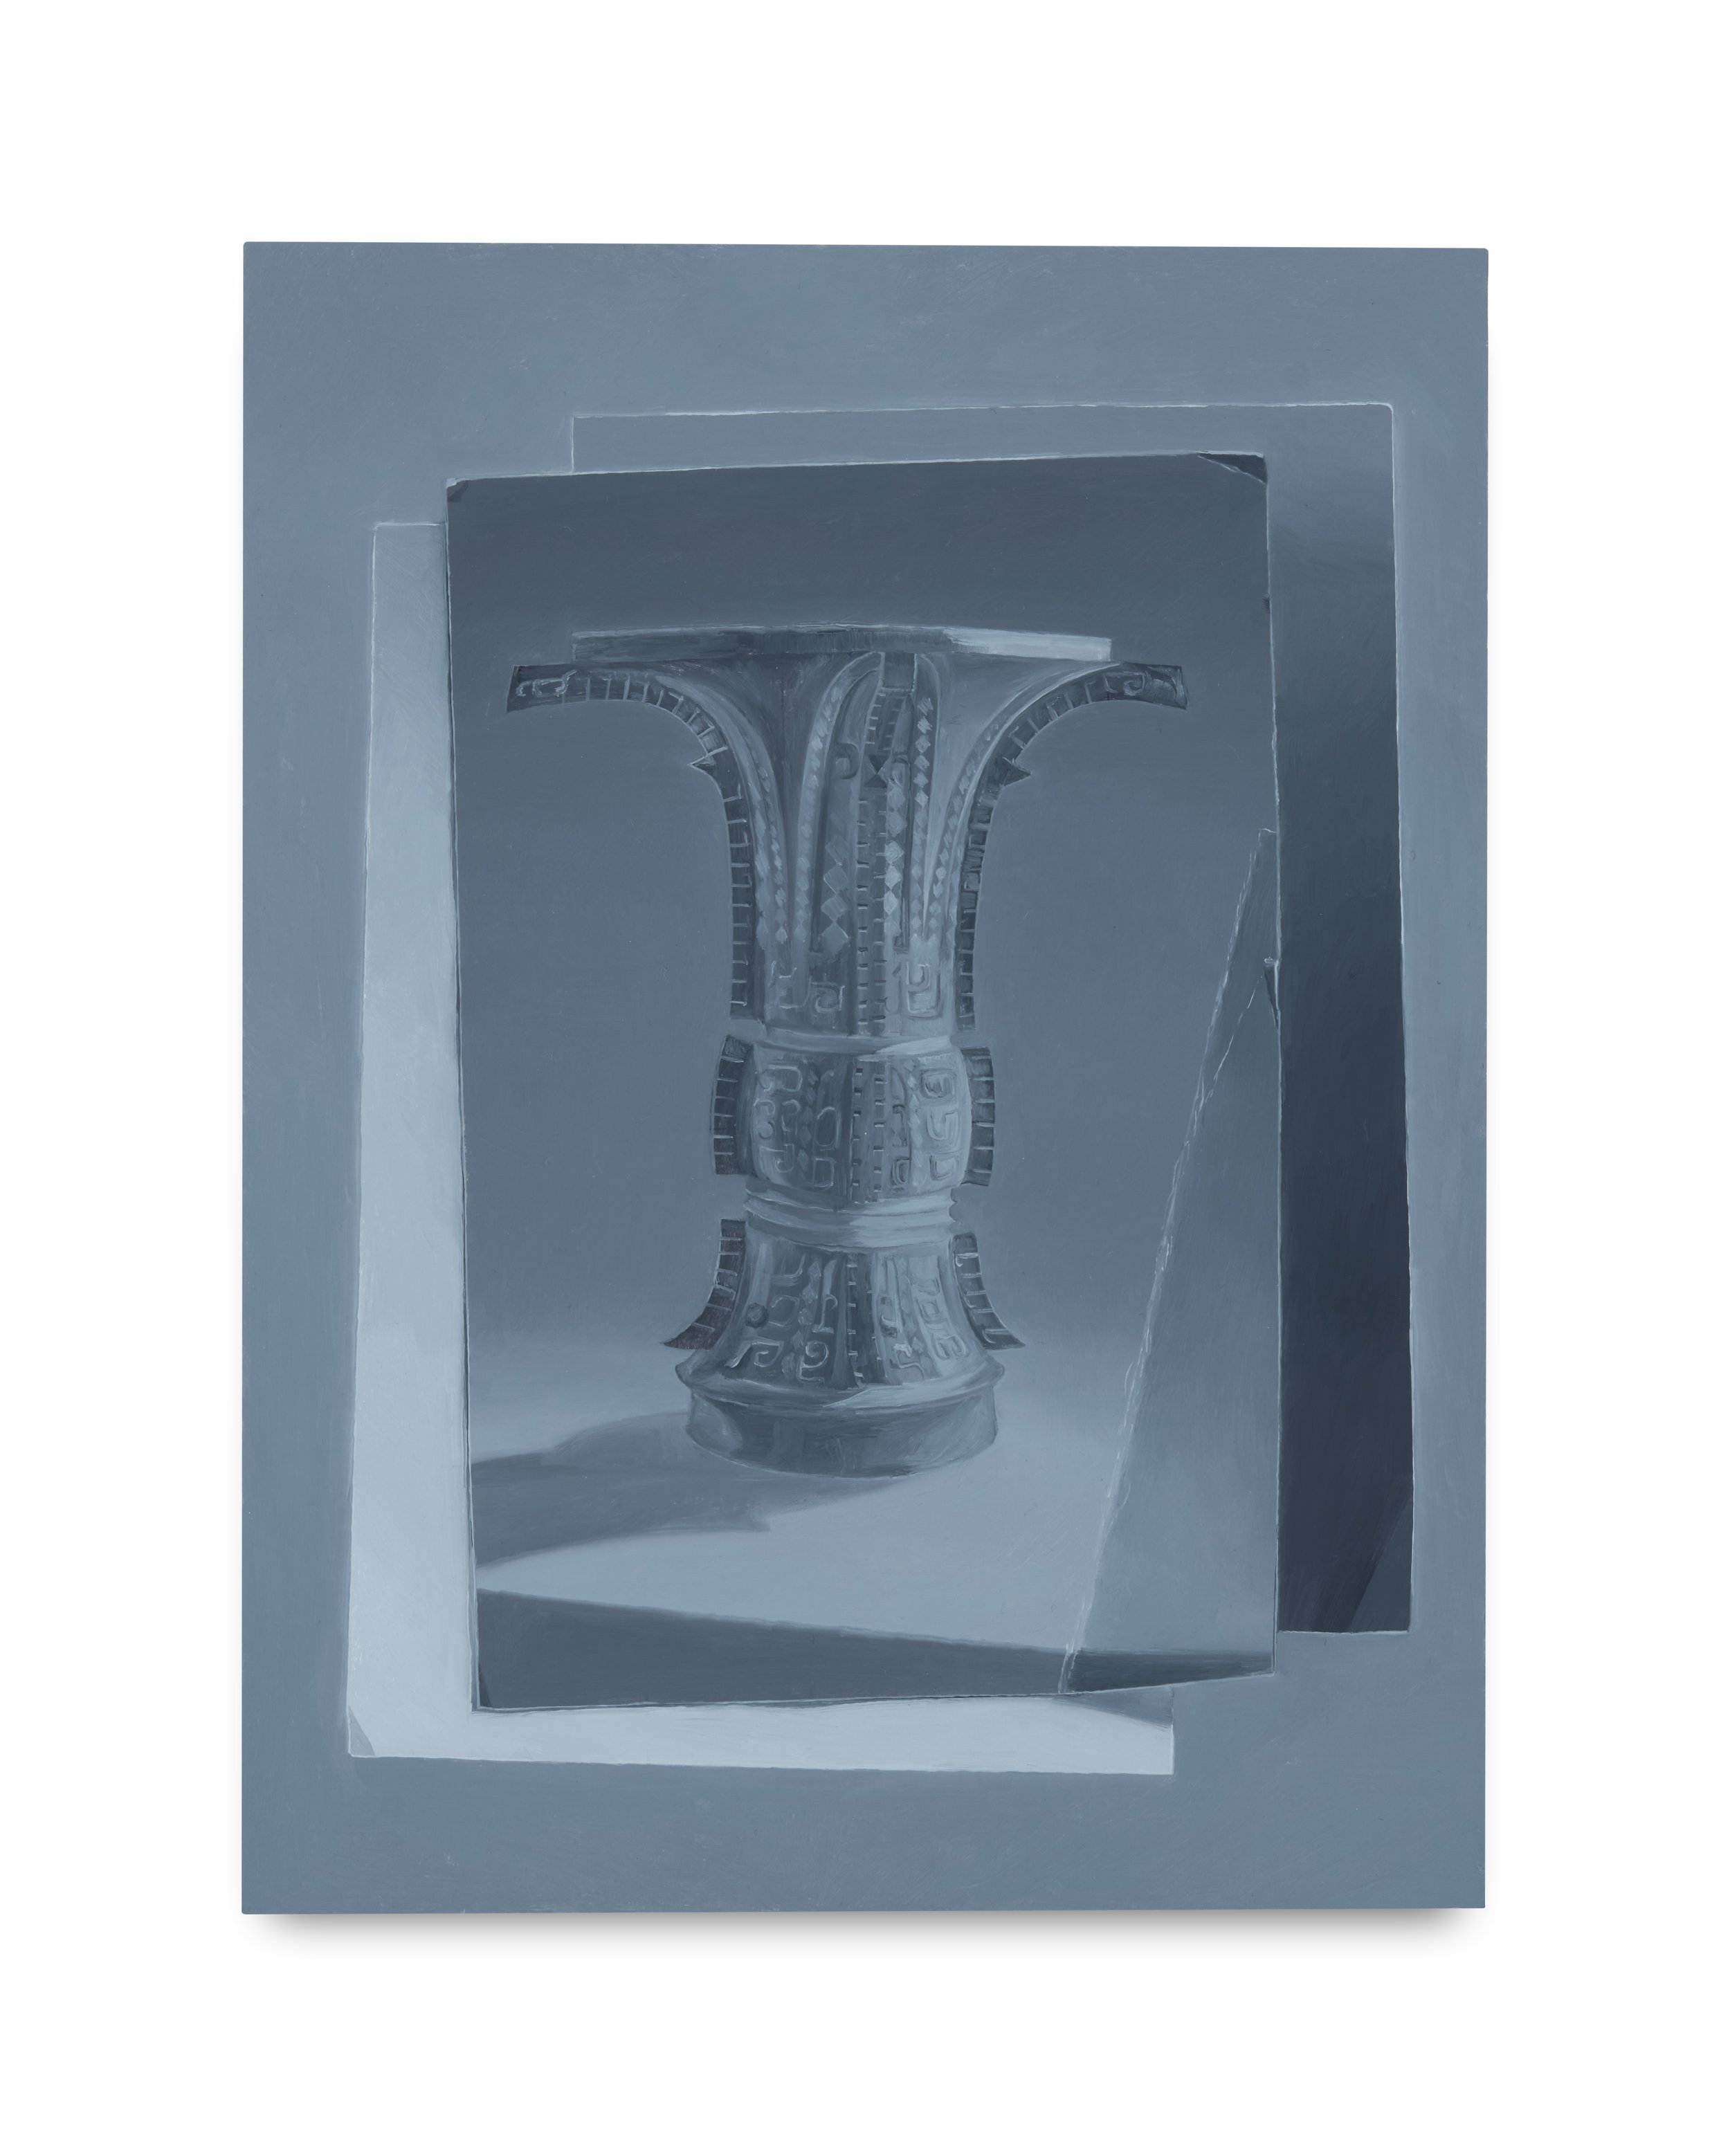   Untitled (bronze vessel)  Oil on panel 8x6” 2022  Photograph by Tom Carter, courtesy of Workplace Gallery, London, U.K. 